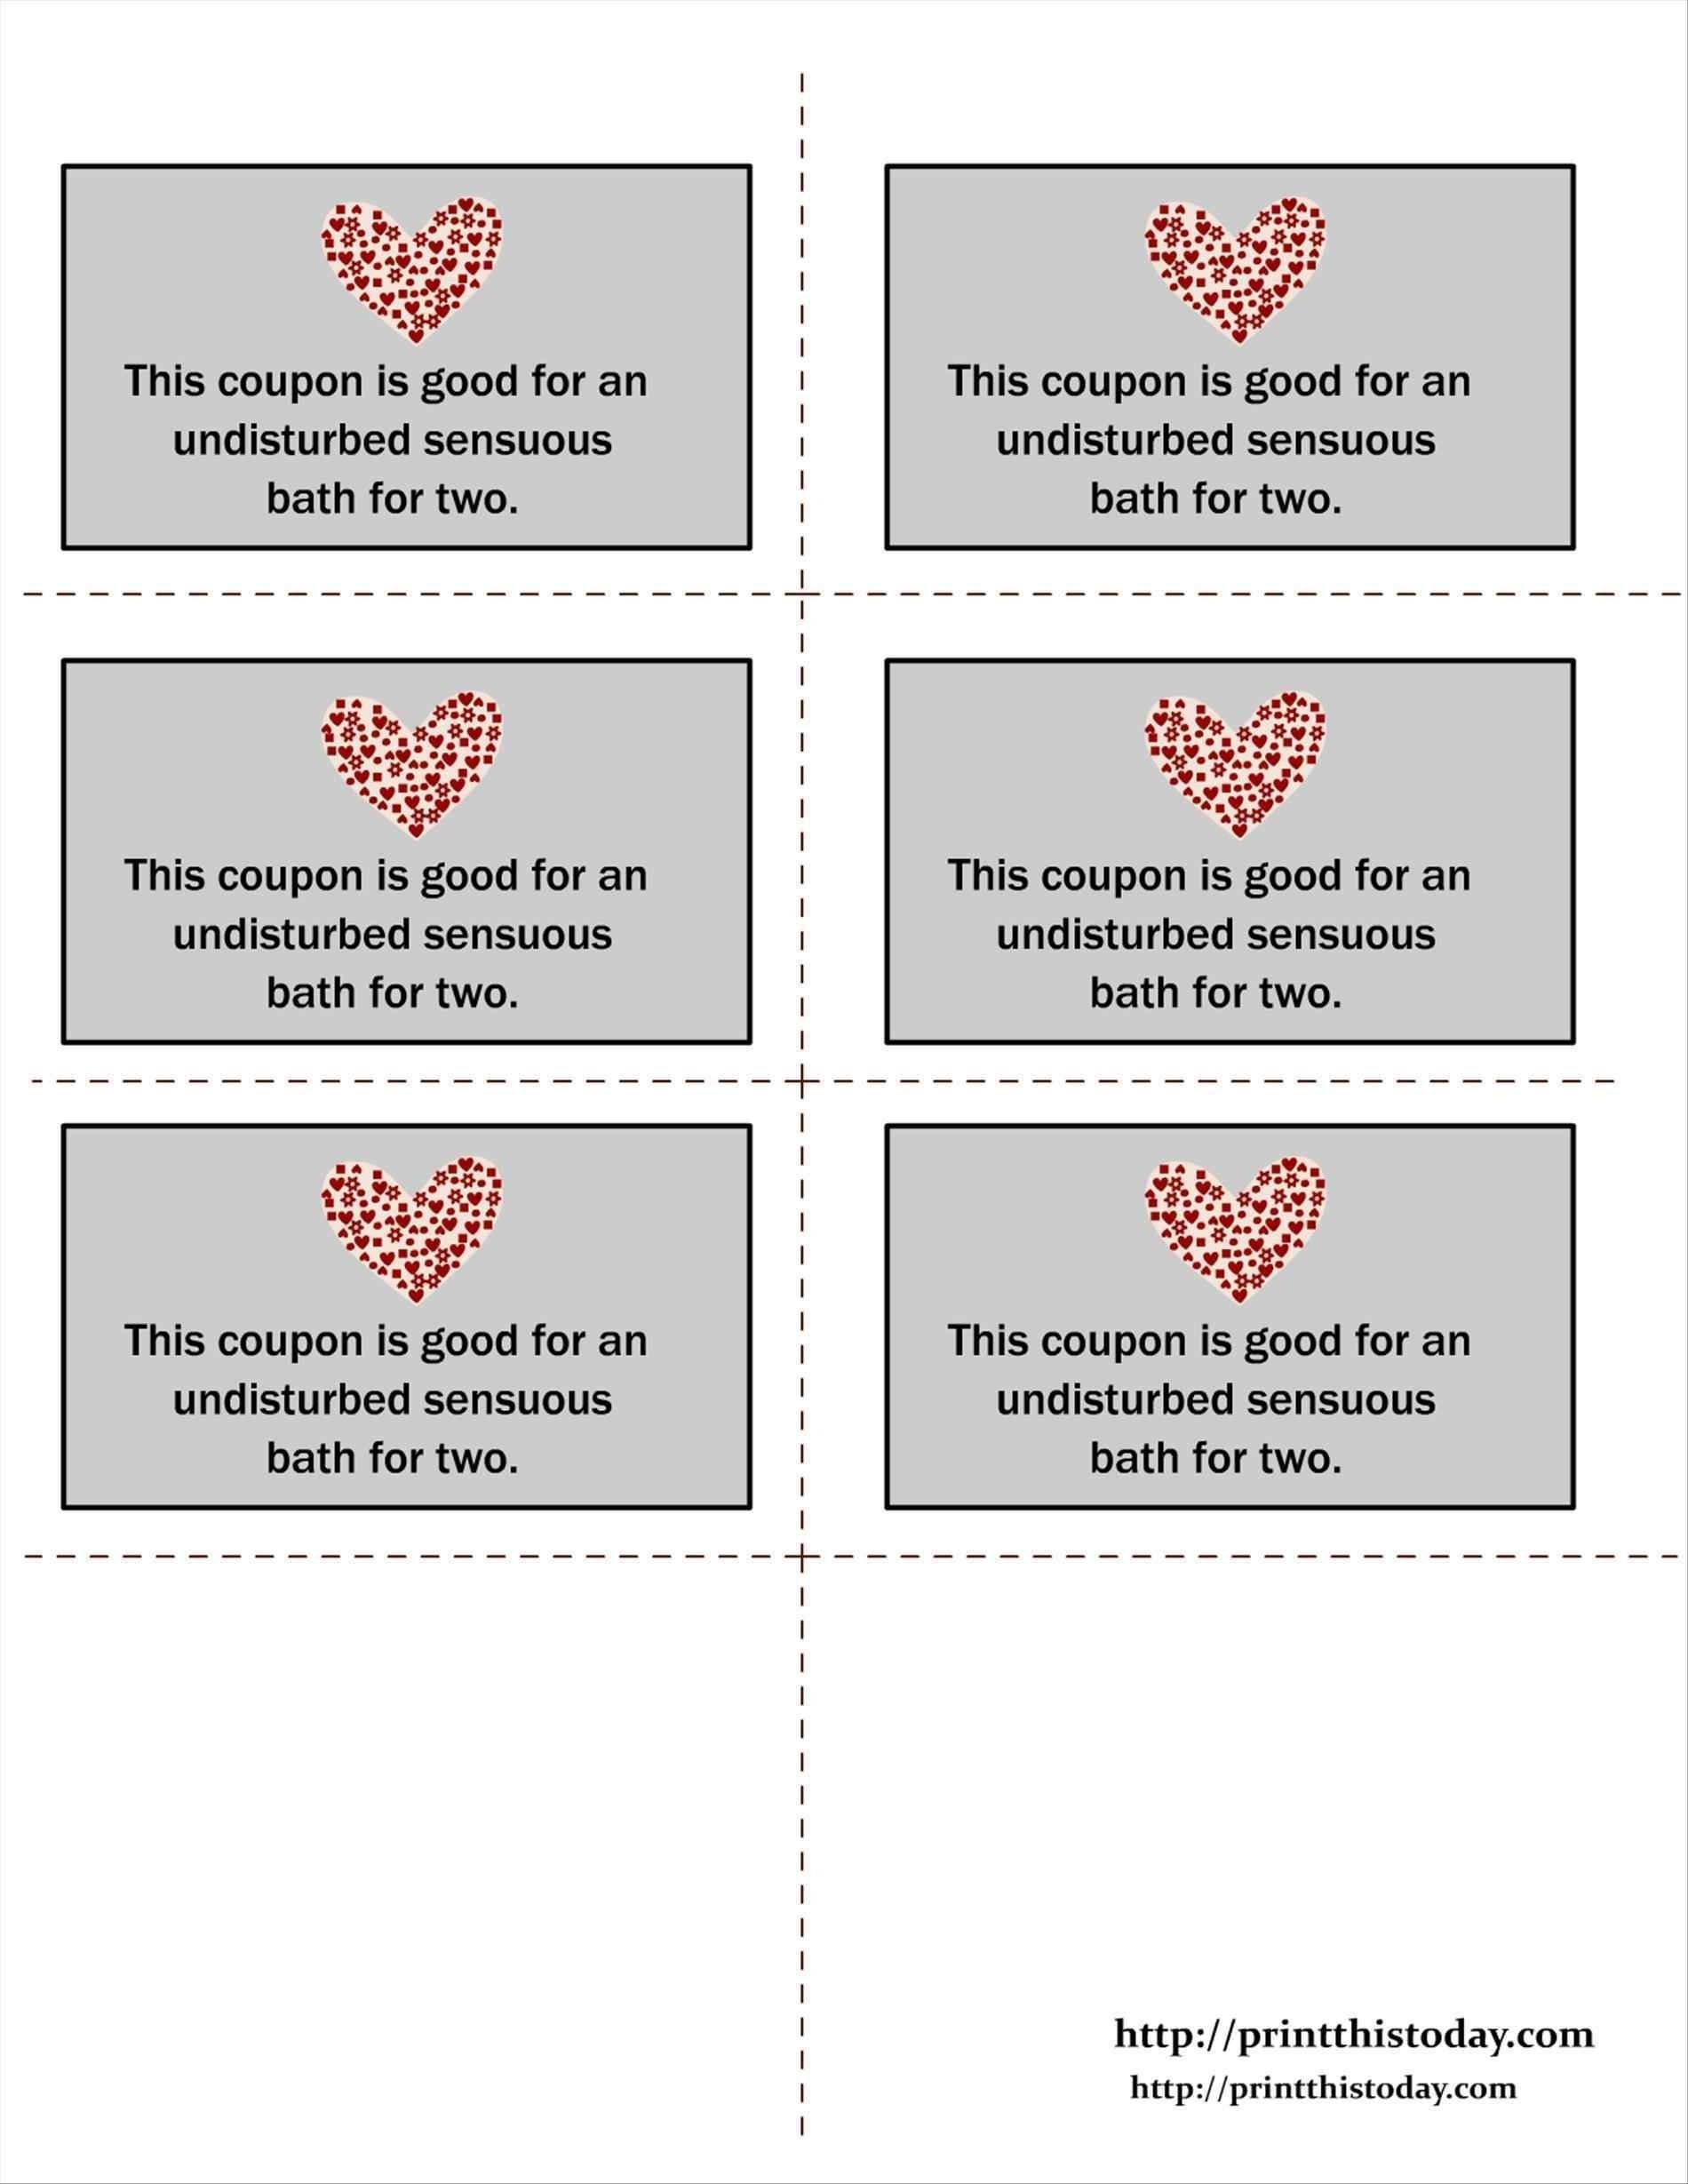 Blank Printable Love Coupons For Him | Chart And Printable World - Free Printable Coupons For Husband